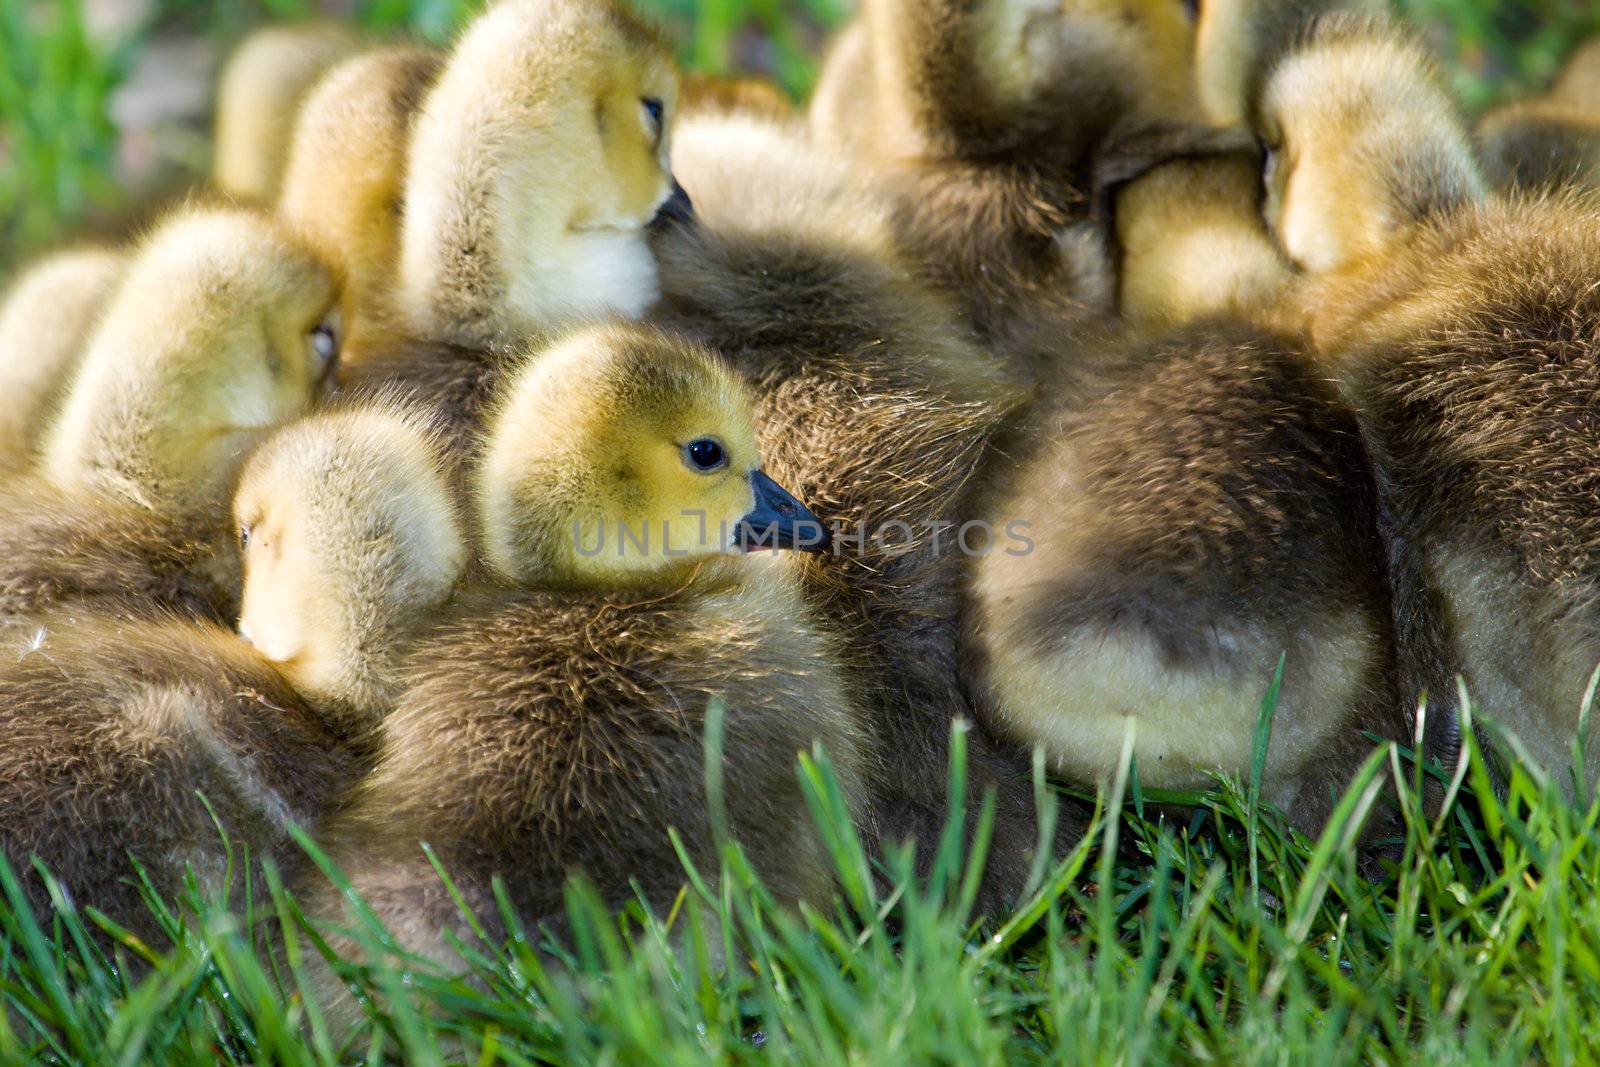 A group of canadian goslings by Coffee999